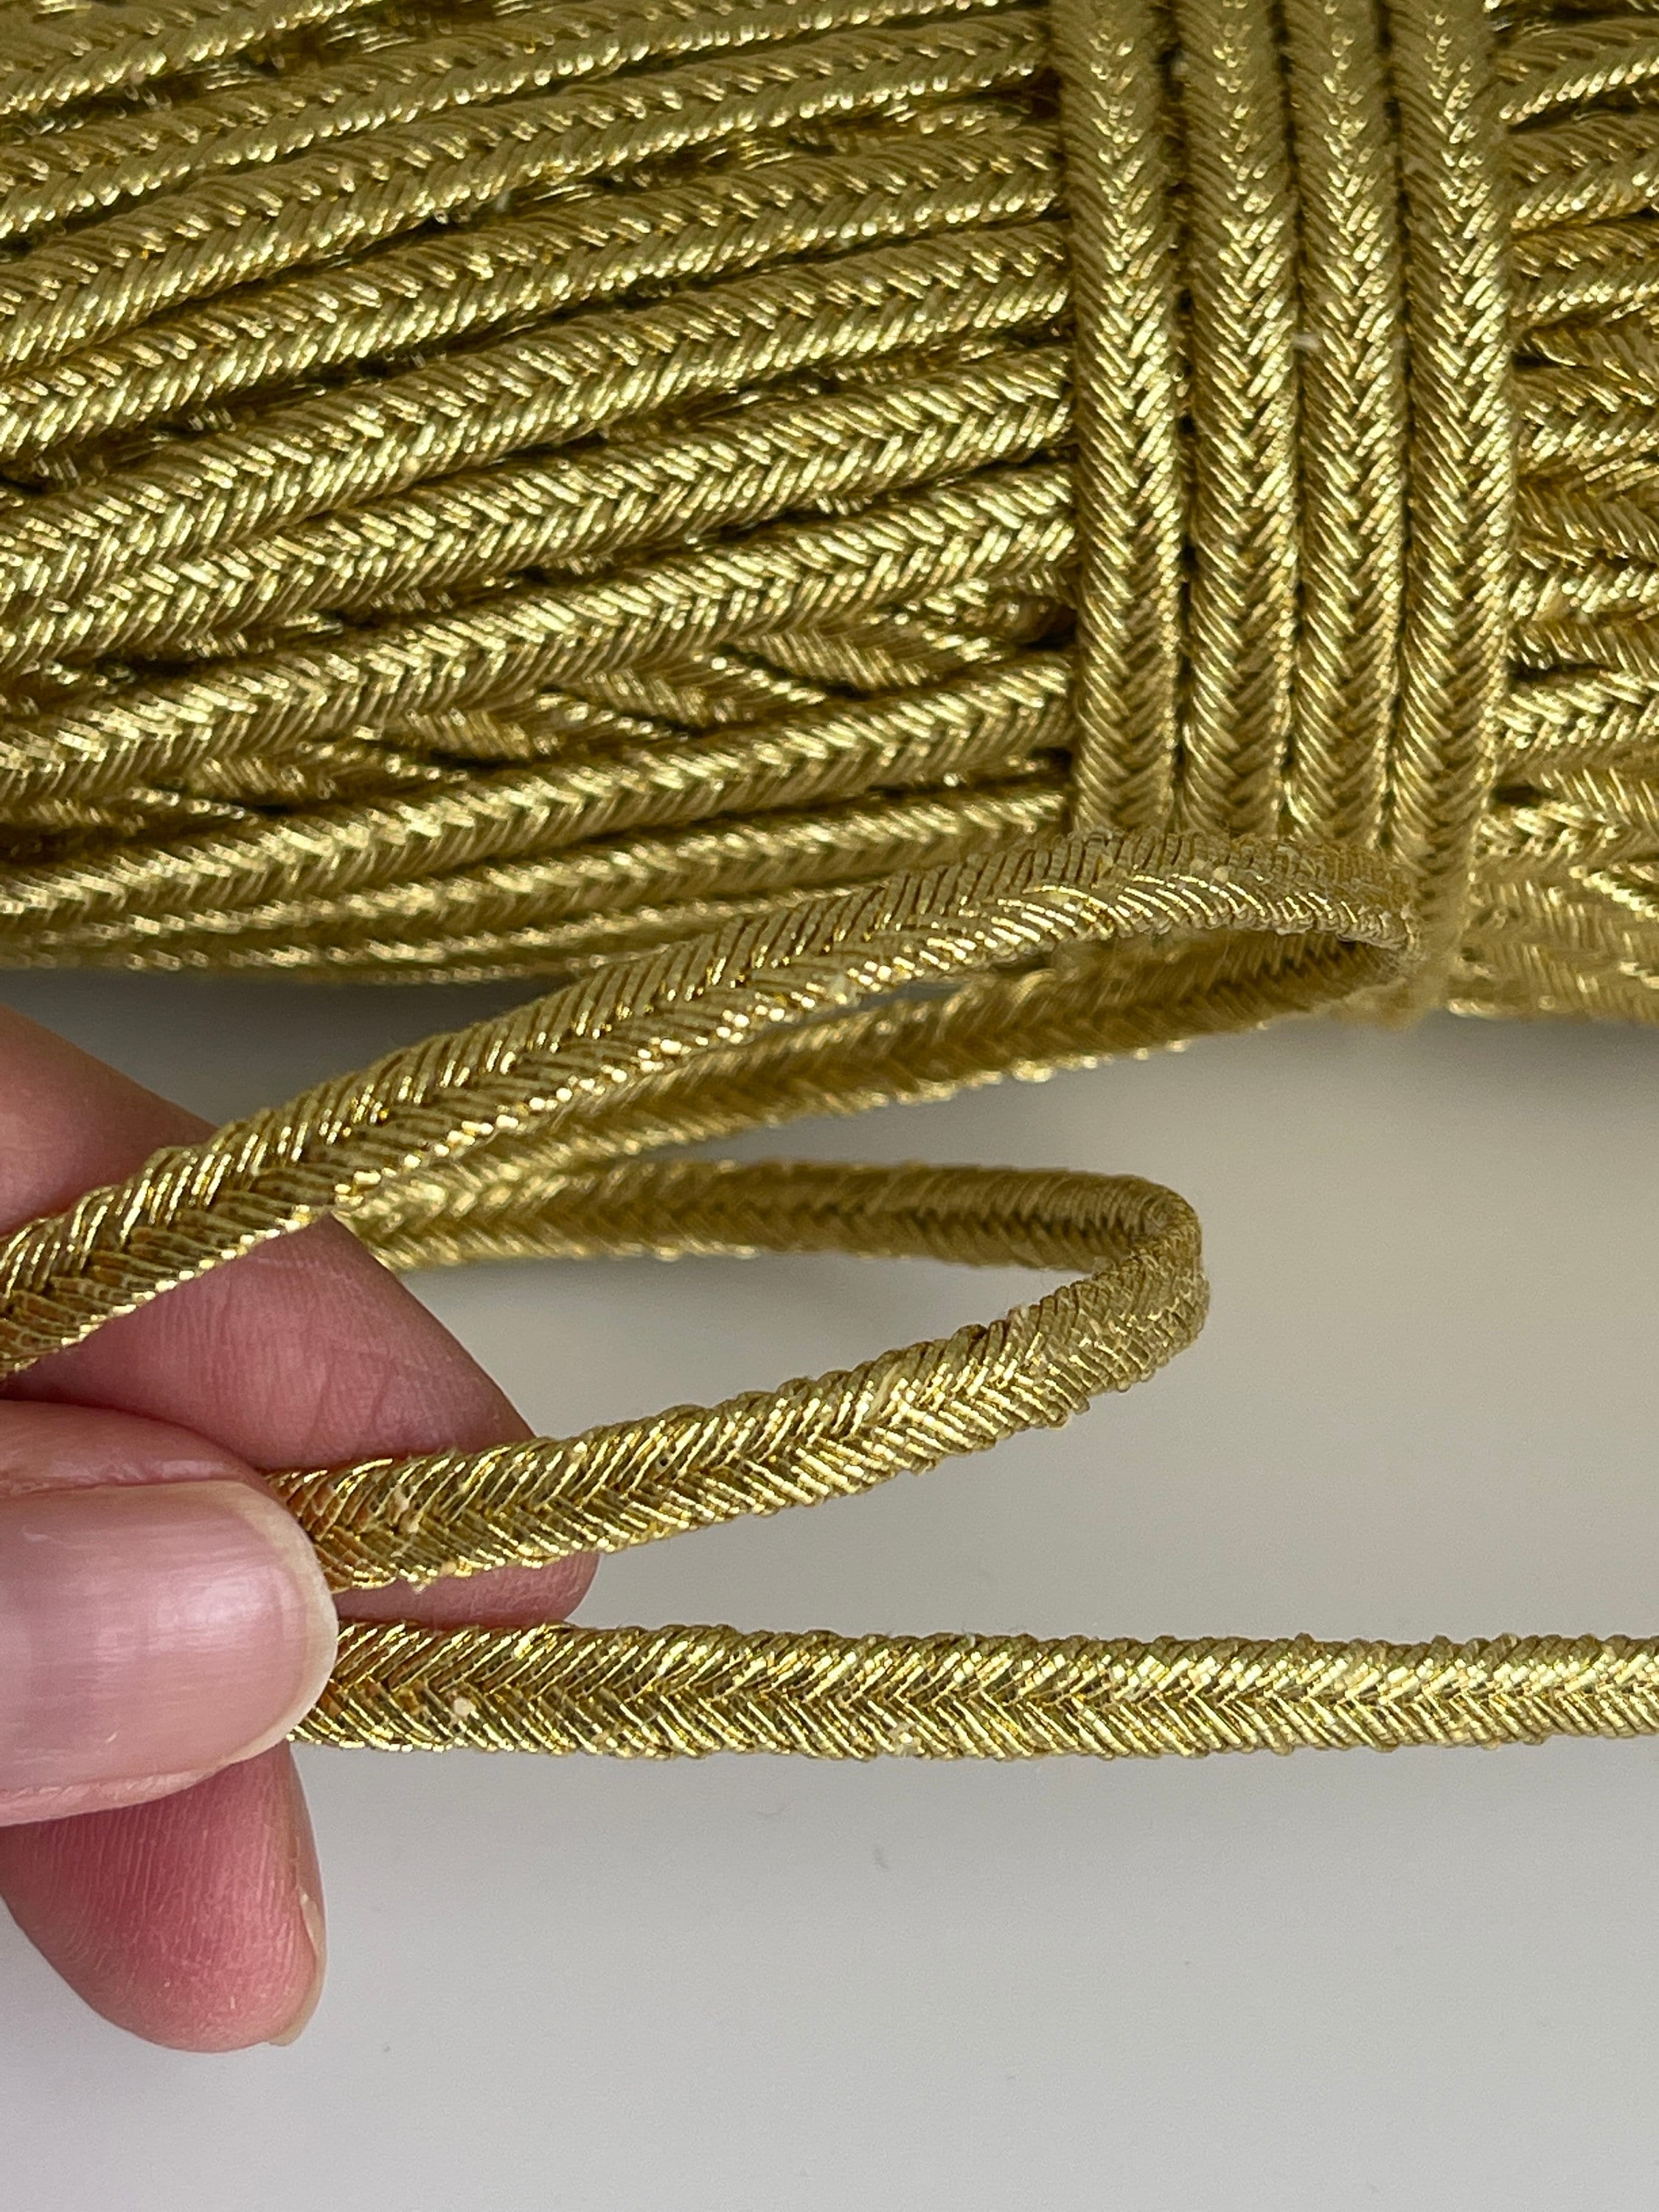 India Lace, Sewing Piping Cord, Metallic Antique Gold Gota Patti Piping Cord,  Indian Trim 10 Yards -  Israel